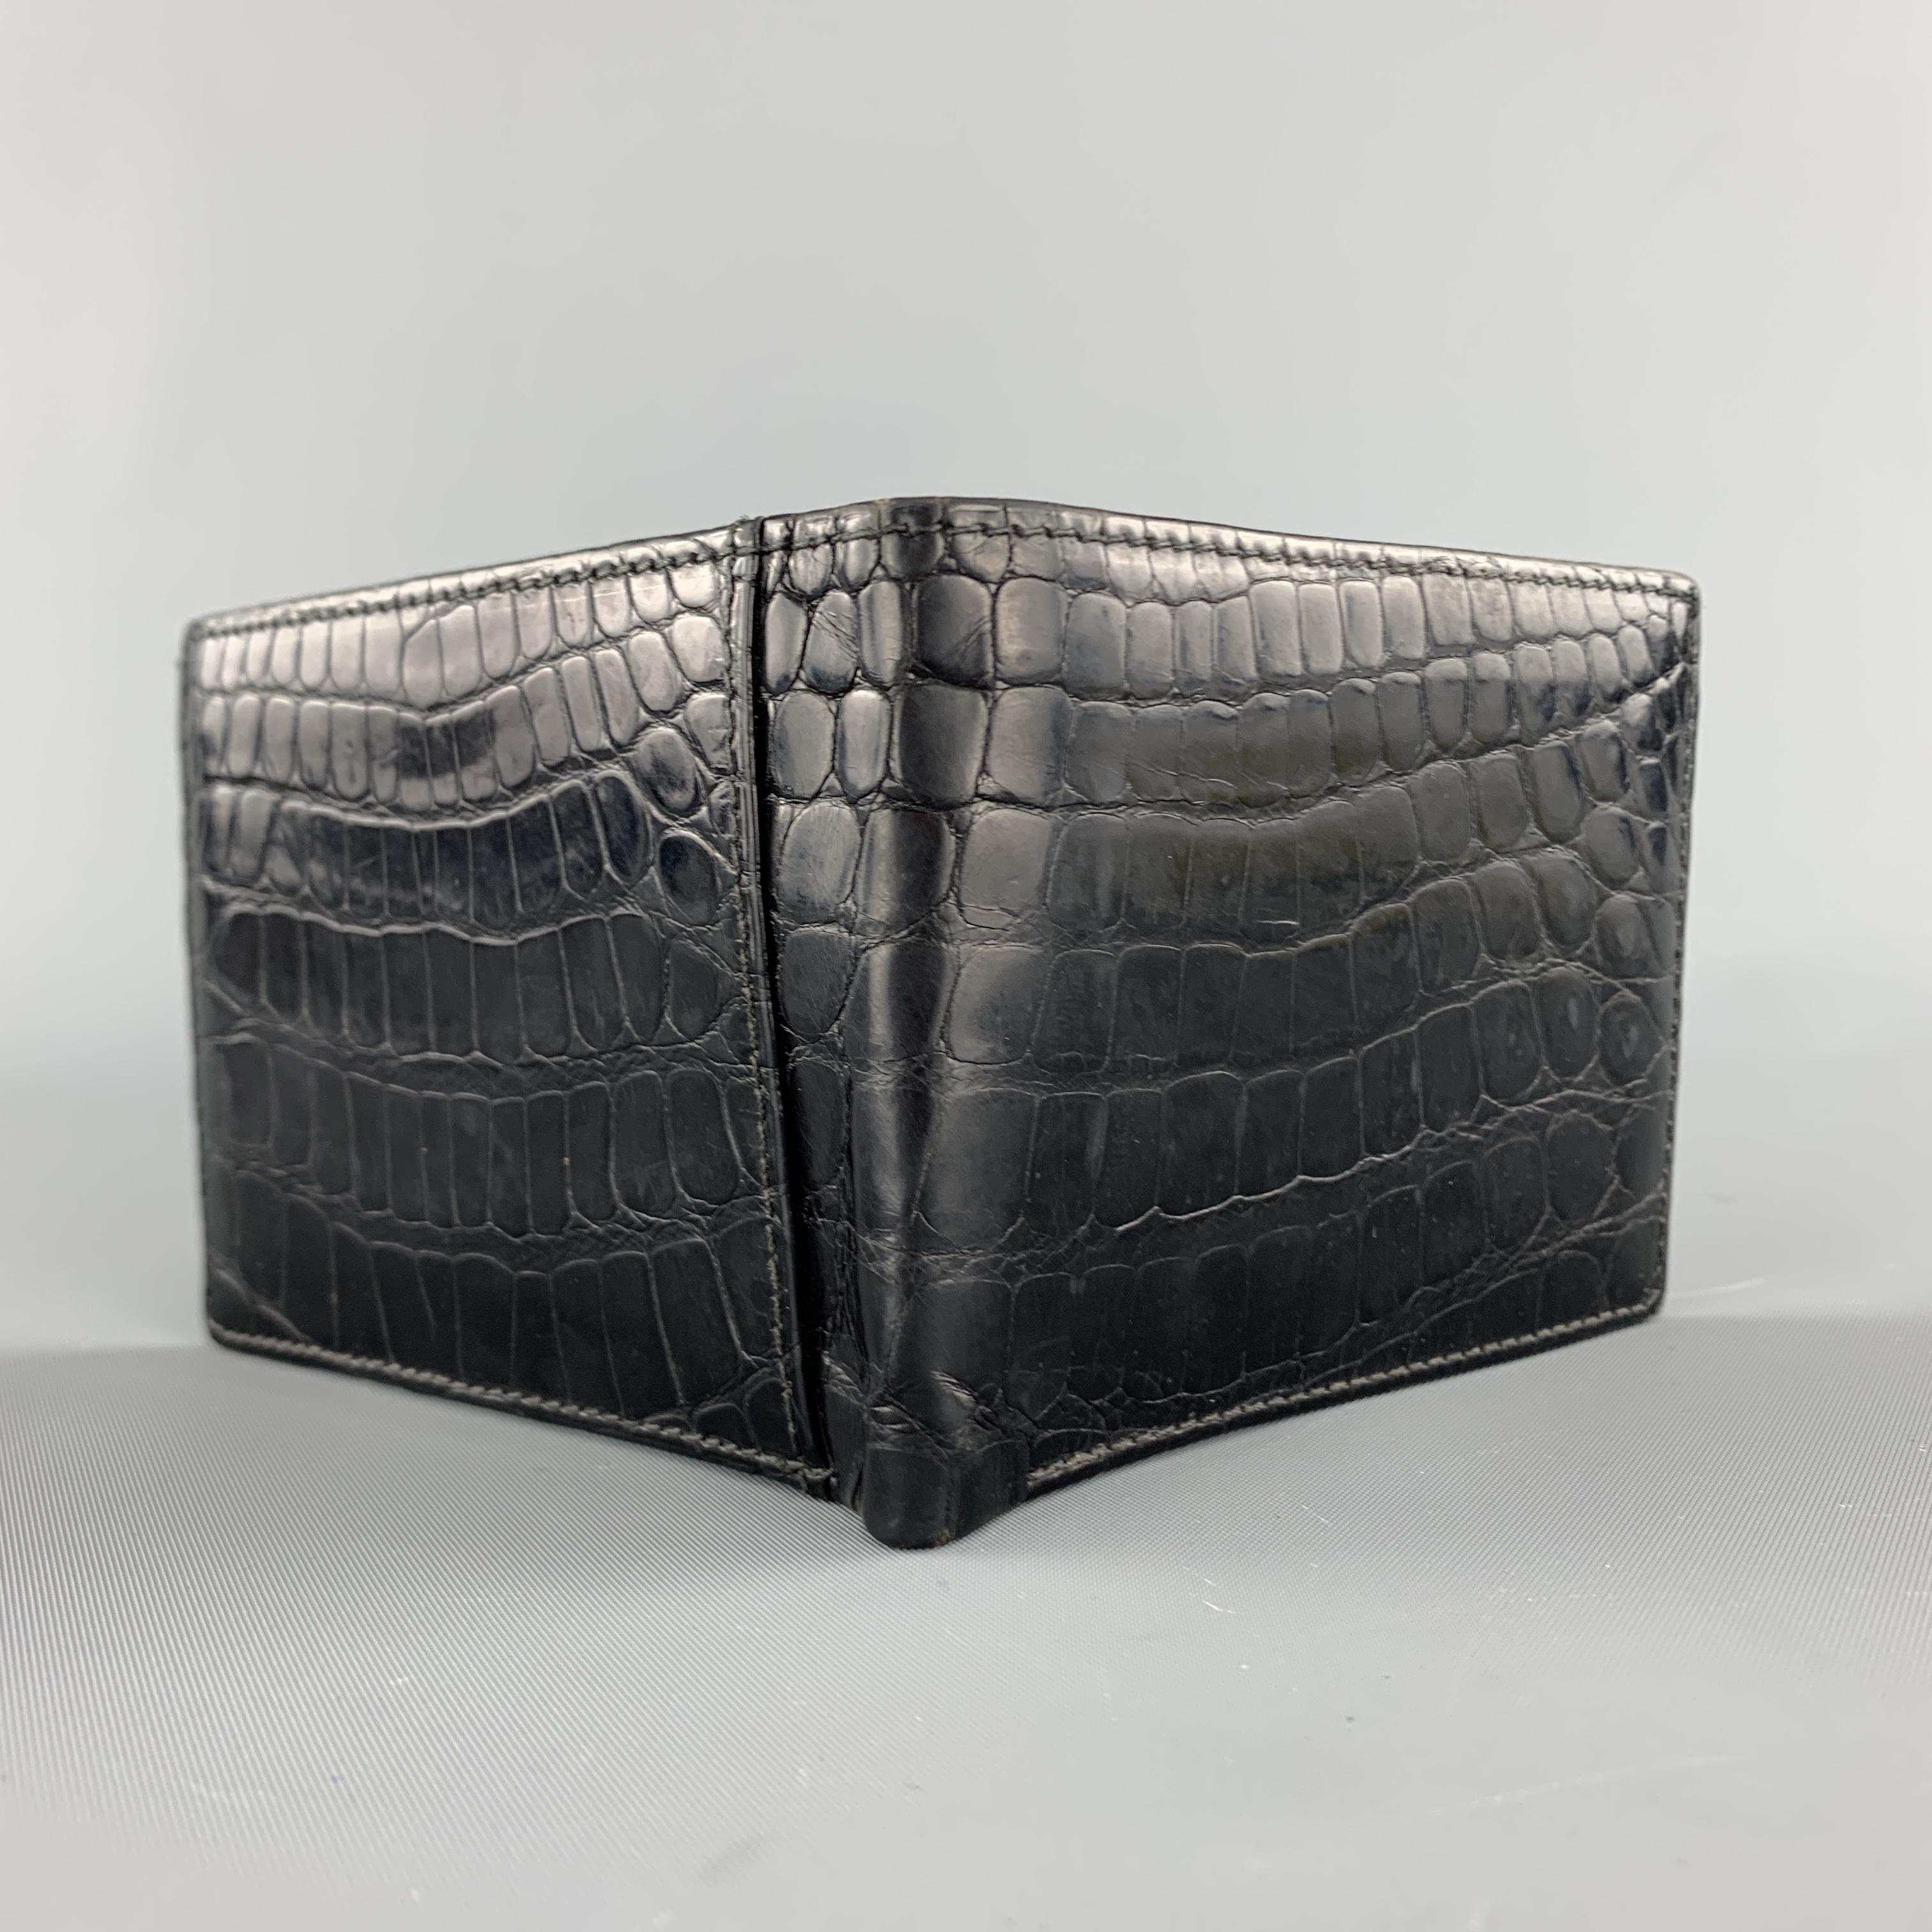 ROMEO SANTAMARIA bifold wallet comes in black alligator embossed leather with a card slot interior. Made in Italy.

Good Pre-Owned Condition.

4.25 x 3.25 in.